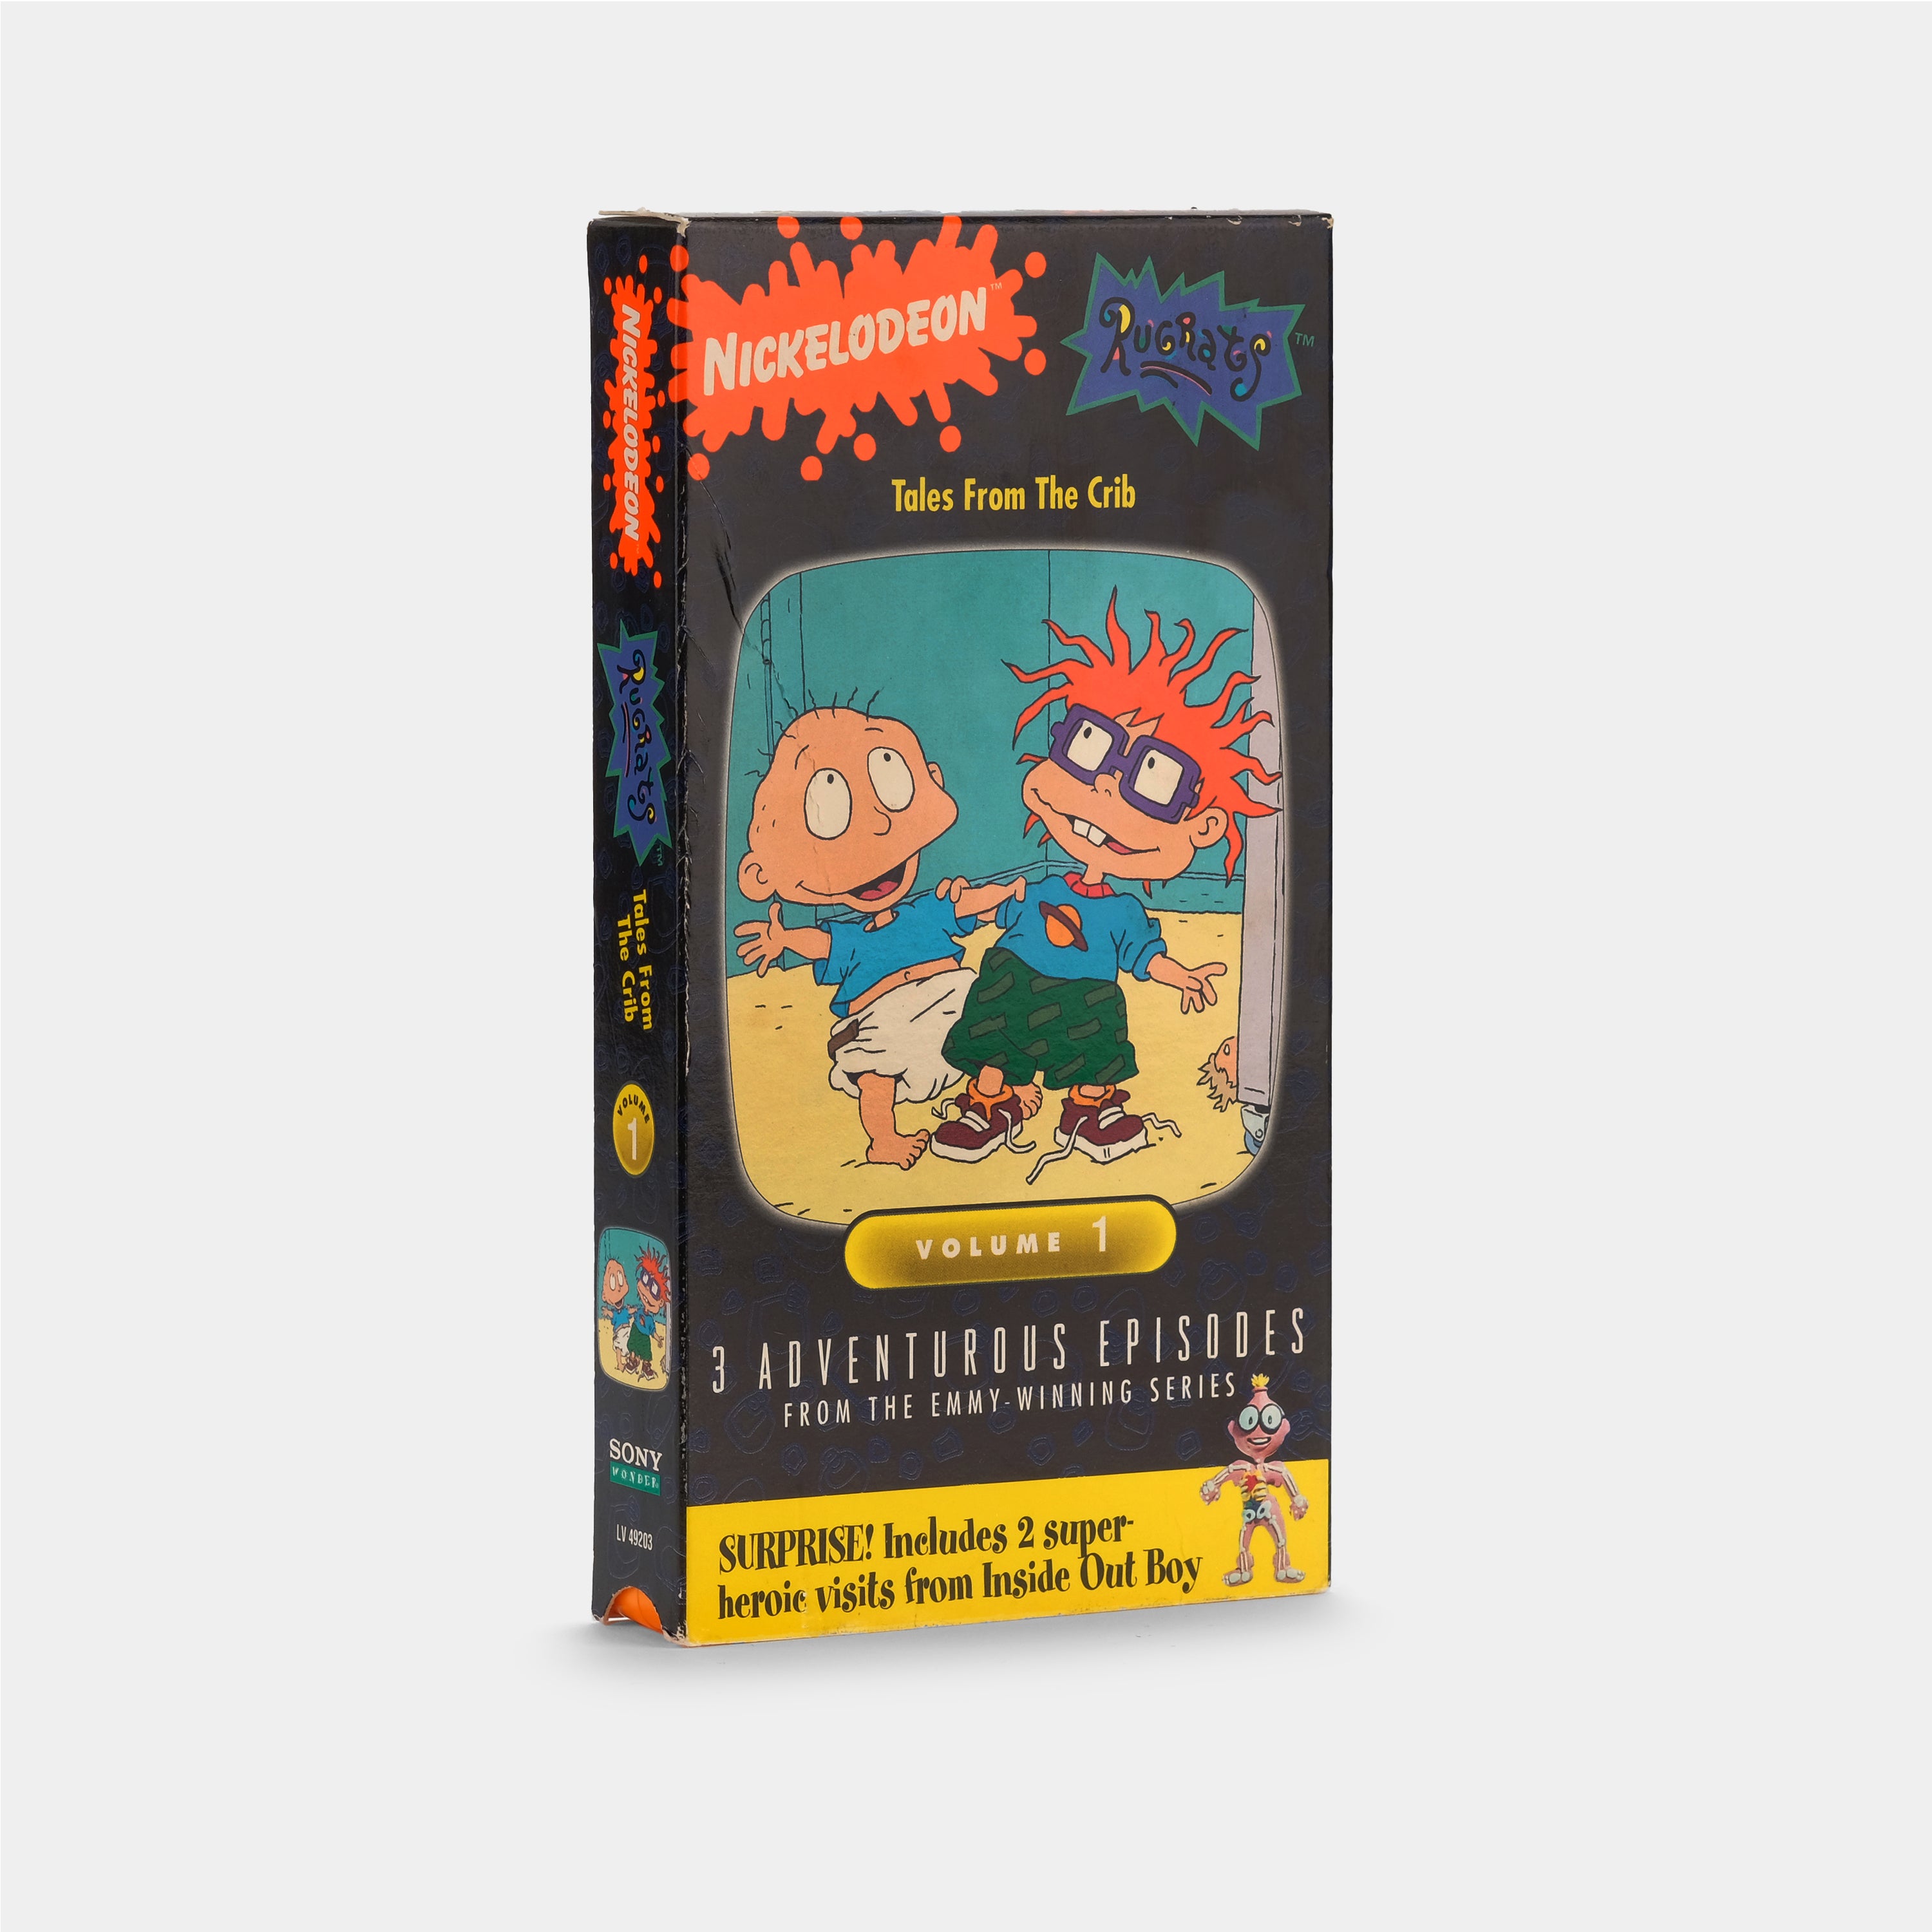 Rugrats: Tales from the Crib VHS Tape